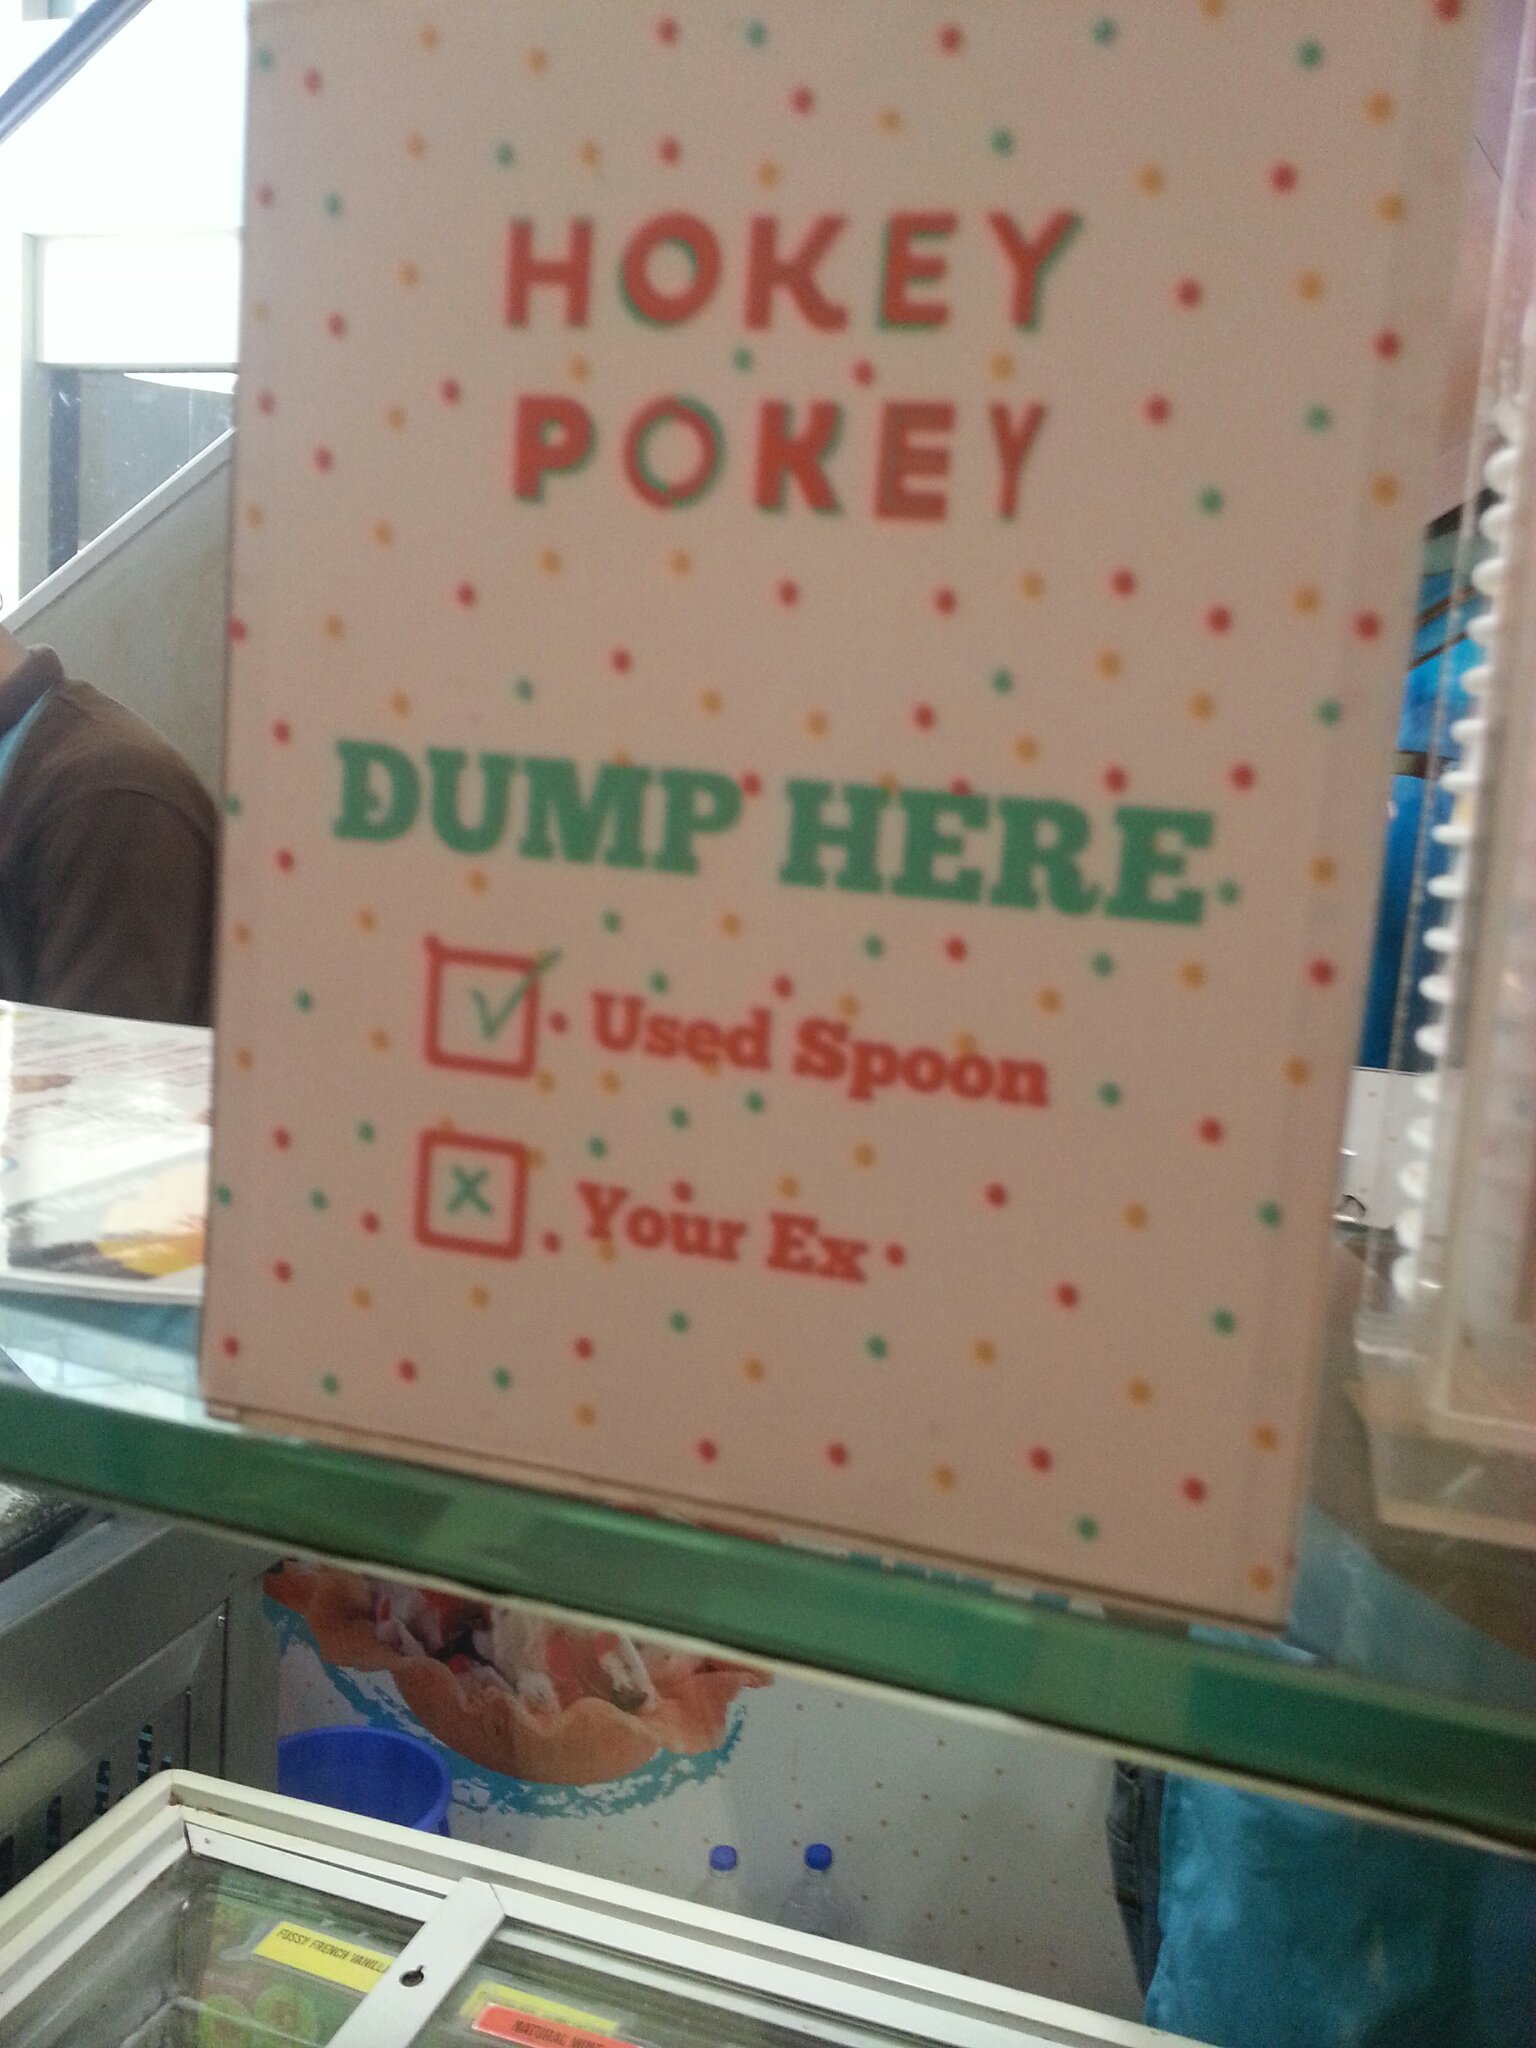 Saw this at an ice cream parlor - meme